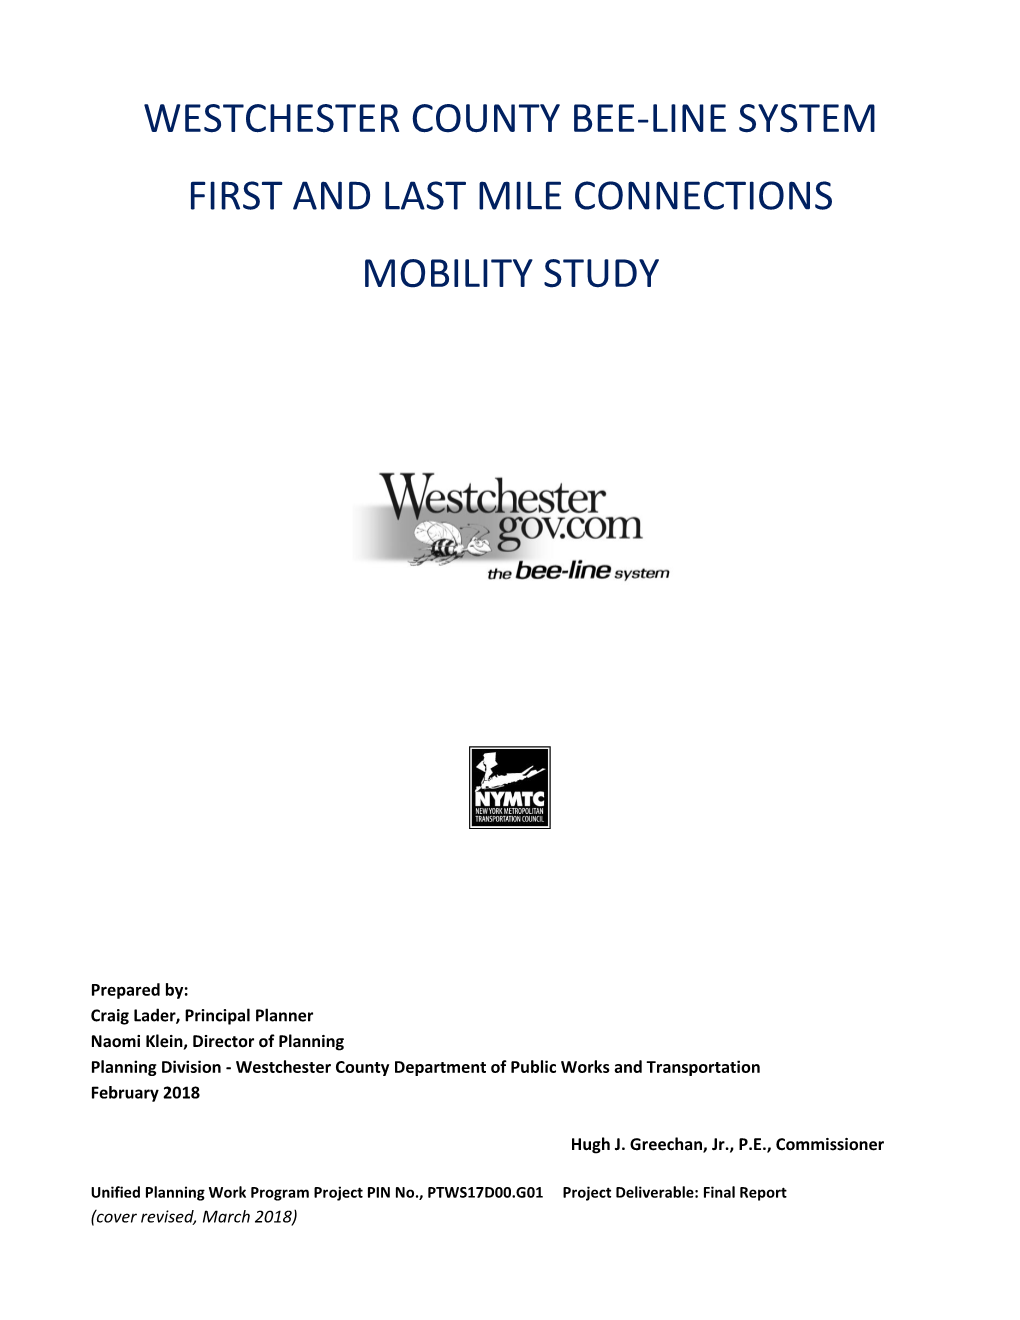 Westchester County Bee-Line System First and Last Mile Mobility Study